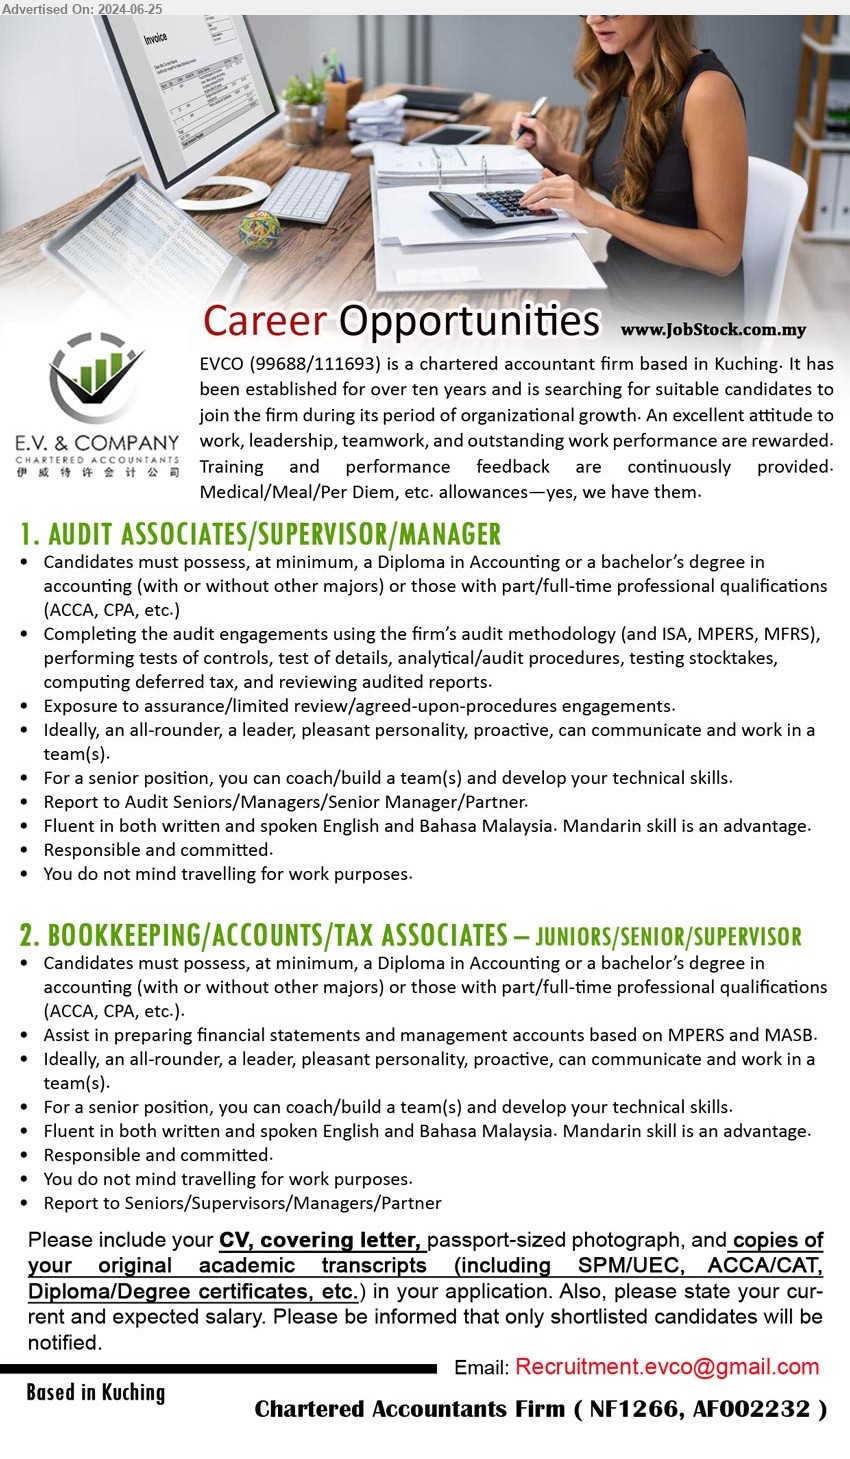 E.V. AND COMPANY - 1. AUDIT ASSOCIATES/SUPERVISOR/MANAGER (Kuching), Diploma in Accounting or a bachelor’s degree in accounting (with or without other majors) or those with part/full-time professional qualifications (ACCA, CPA, etc.),...
2. BOOKKEEPING/ACCOUNTS/TAX ASSOCIATES – JUNIORS/SENIOR/SUPERVISOR (Kuching), Diploma in Accounting or a bachelor’s degree in 
accounting (with or without other majors) or those with part/full-time professional qualifications (ACCA, CPA, etc.).,...
Email resume to ...